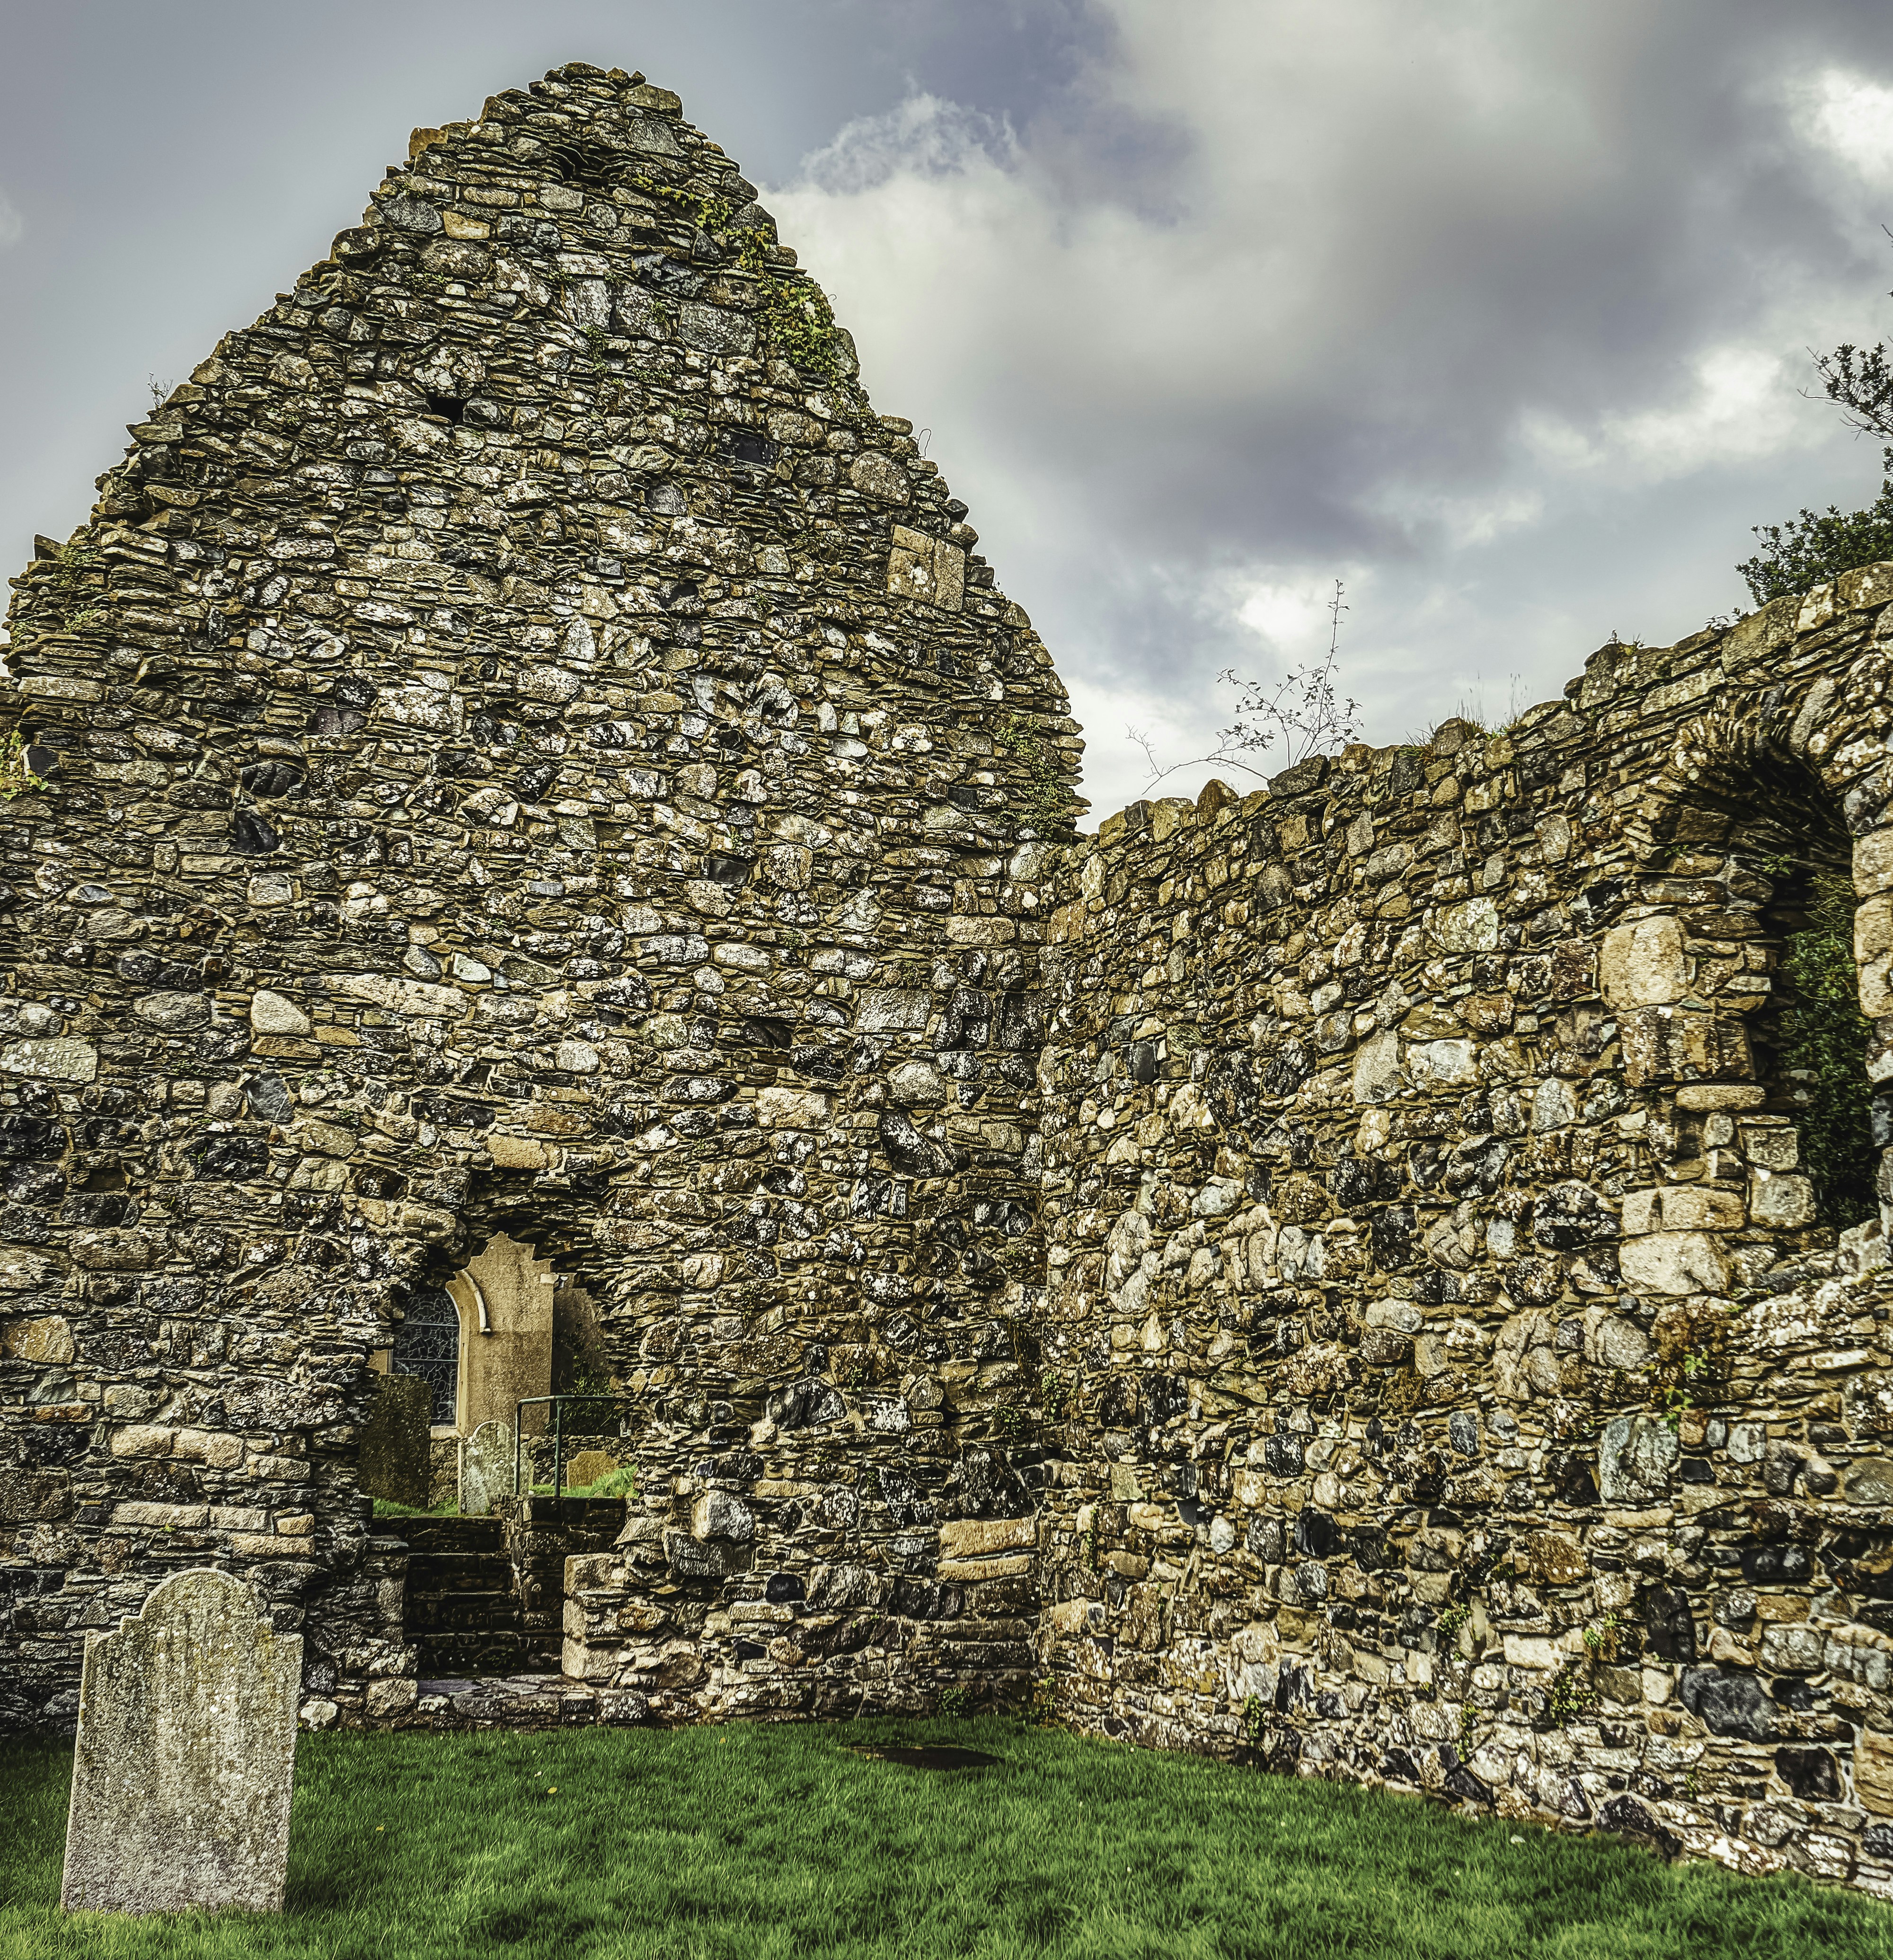 The ruins of a medieval, 13th Century, monastic church in Maghera, County Down. Some of the gravestones in the churchyard date to the Anglo-Saxon (450CE to 1066CE) and Norman (1066CE to 1204CE) periods which show that this area had religious significance prior to the building of this church (Sep., 2020).